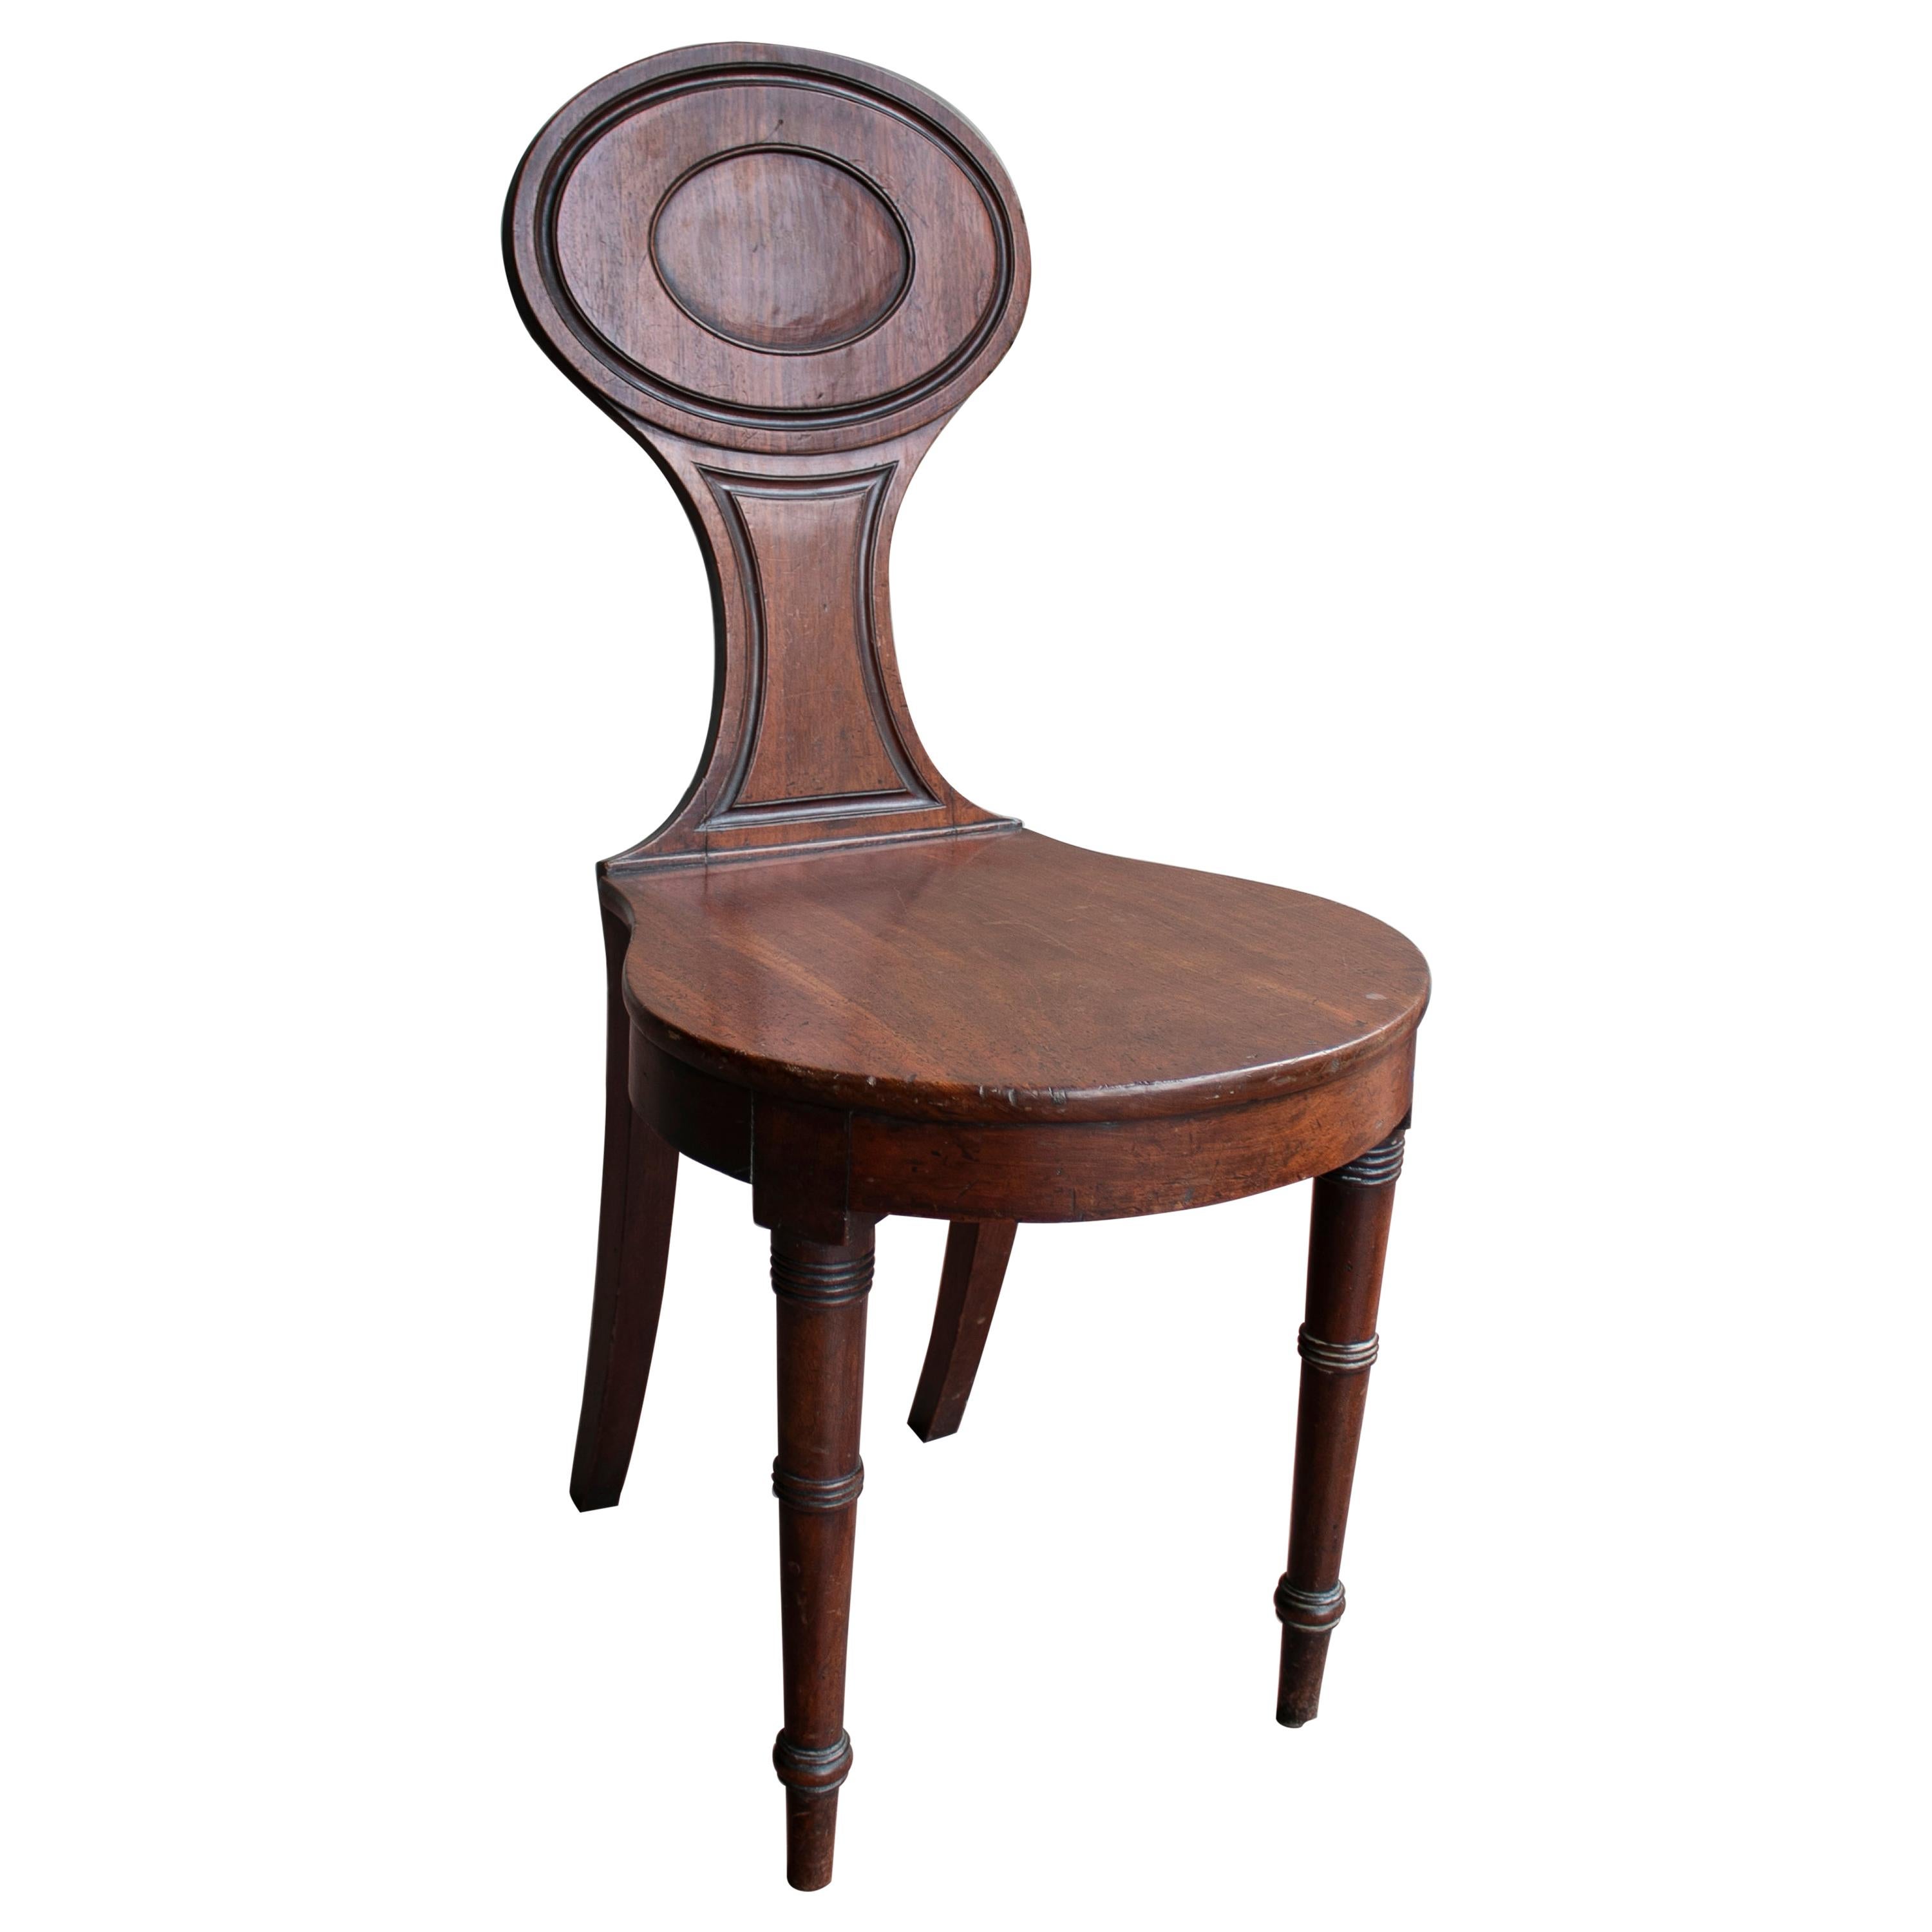 1920s English Smokers Wooden Chair For Sale